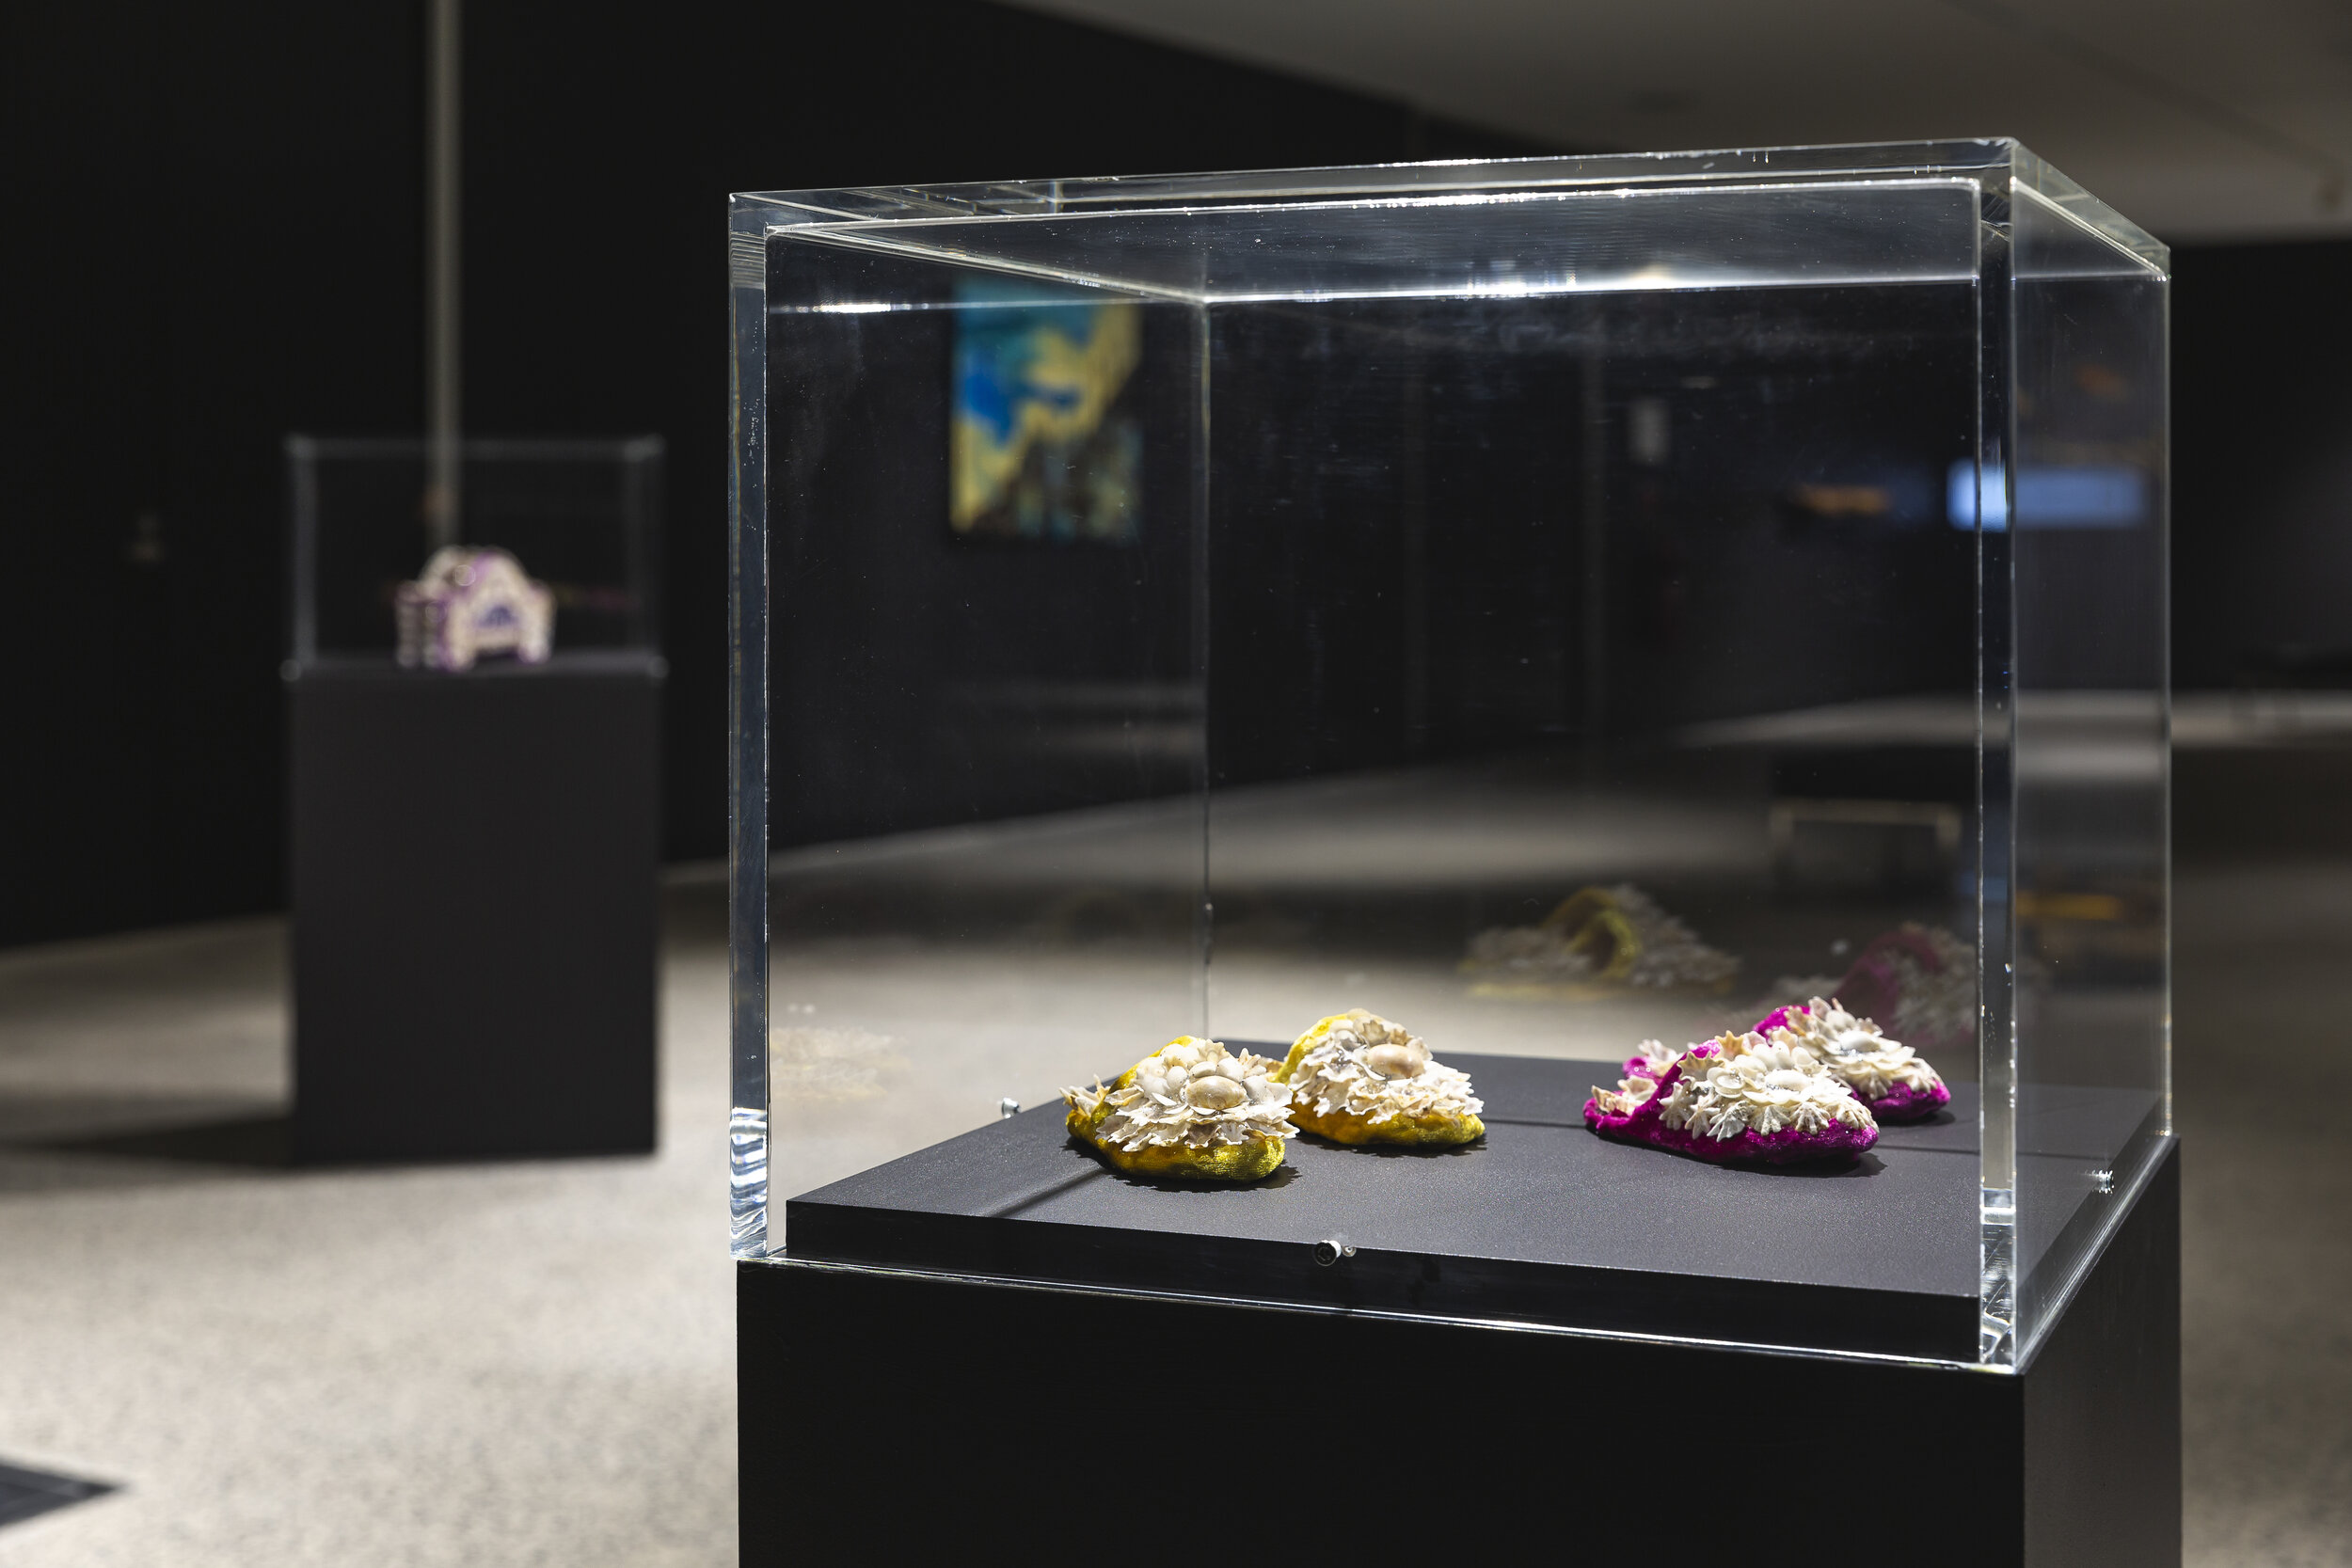   Ngaliya Diyam , exhibition installation view, Granville Centre Art Gallery, Western Sydney, 2020, featuring the work of Aunty Esme Timbery (foreground); courtesy the artist; photo: Document Photography 